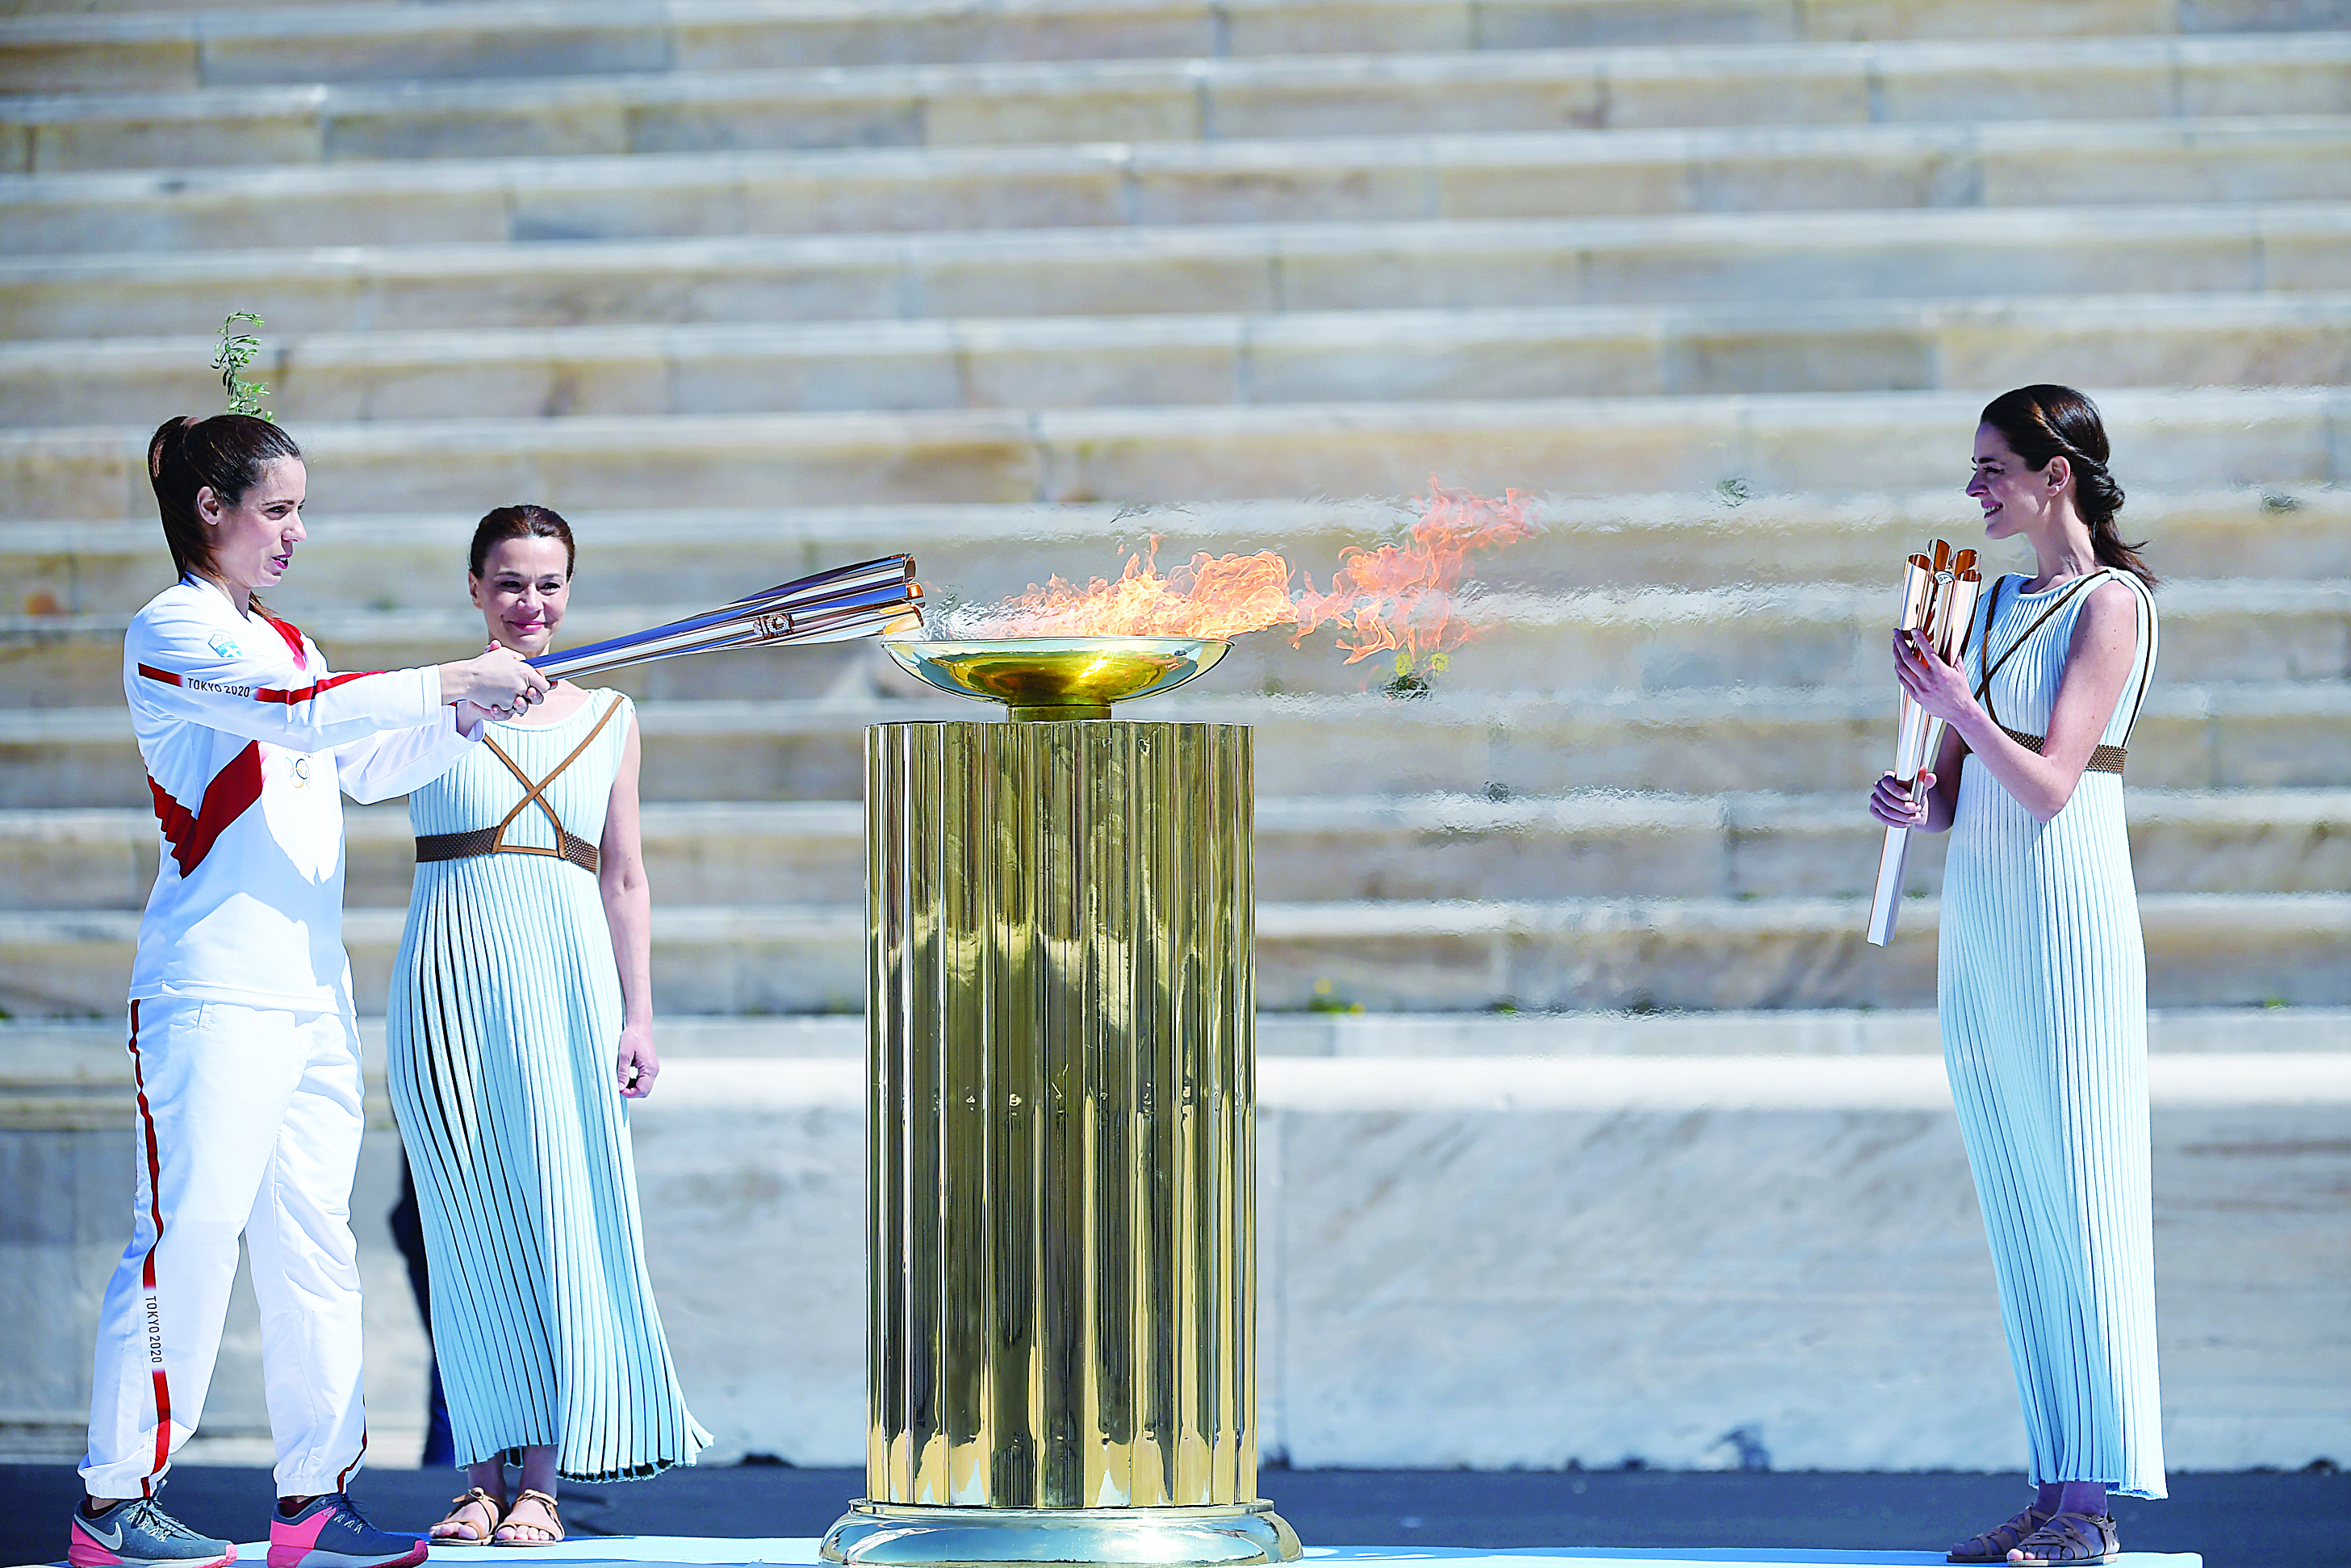 An athlete lights the Olympic torch during the olympic flame handover ceremony for the 2020 Tokyo Summer Olympics, on March 19, 2020 in Athens. (Photo by ARIS MESSINIS / various sources / AFP)